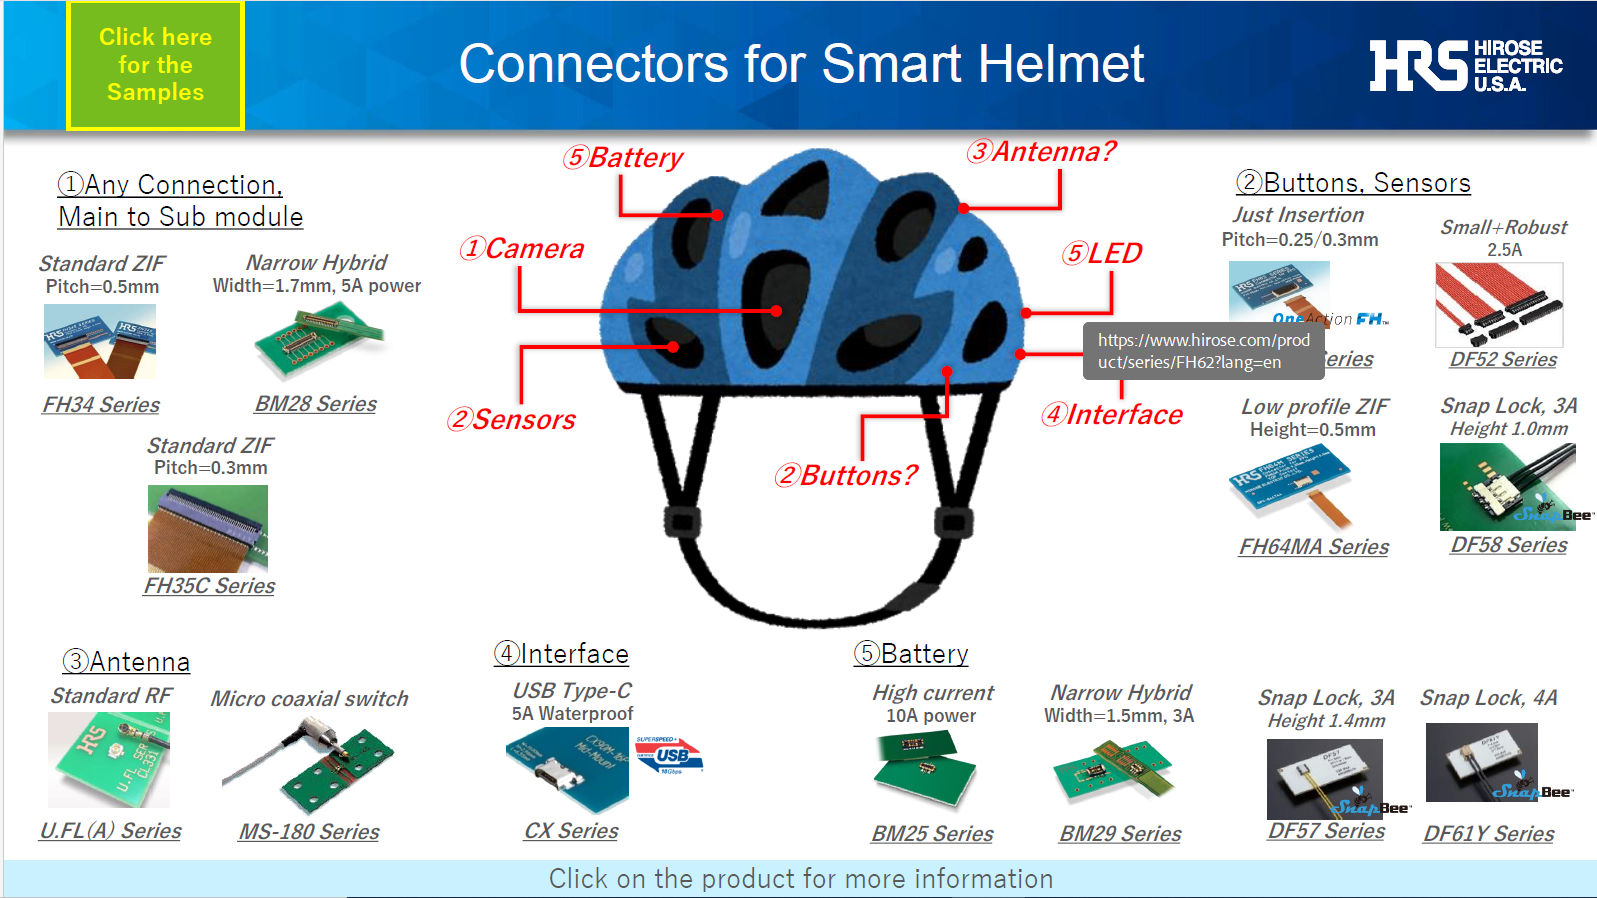 Diagram illustrating Hirose connectors within a smart helmet setup, highlighting features like cameras, sensors, and LEDs.